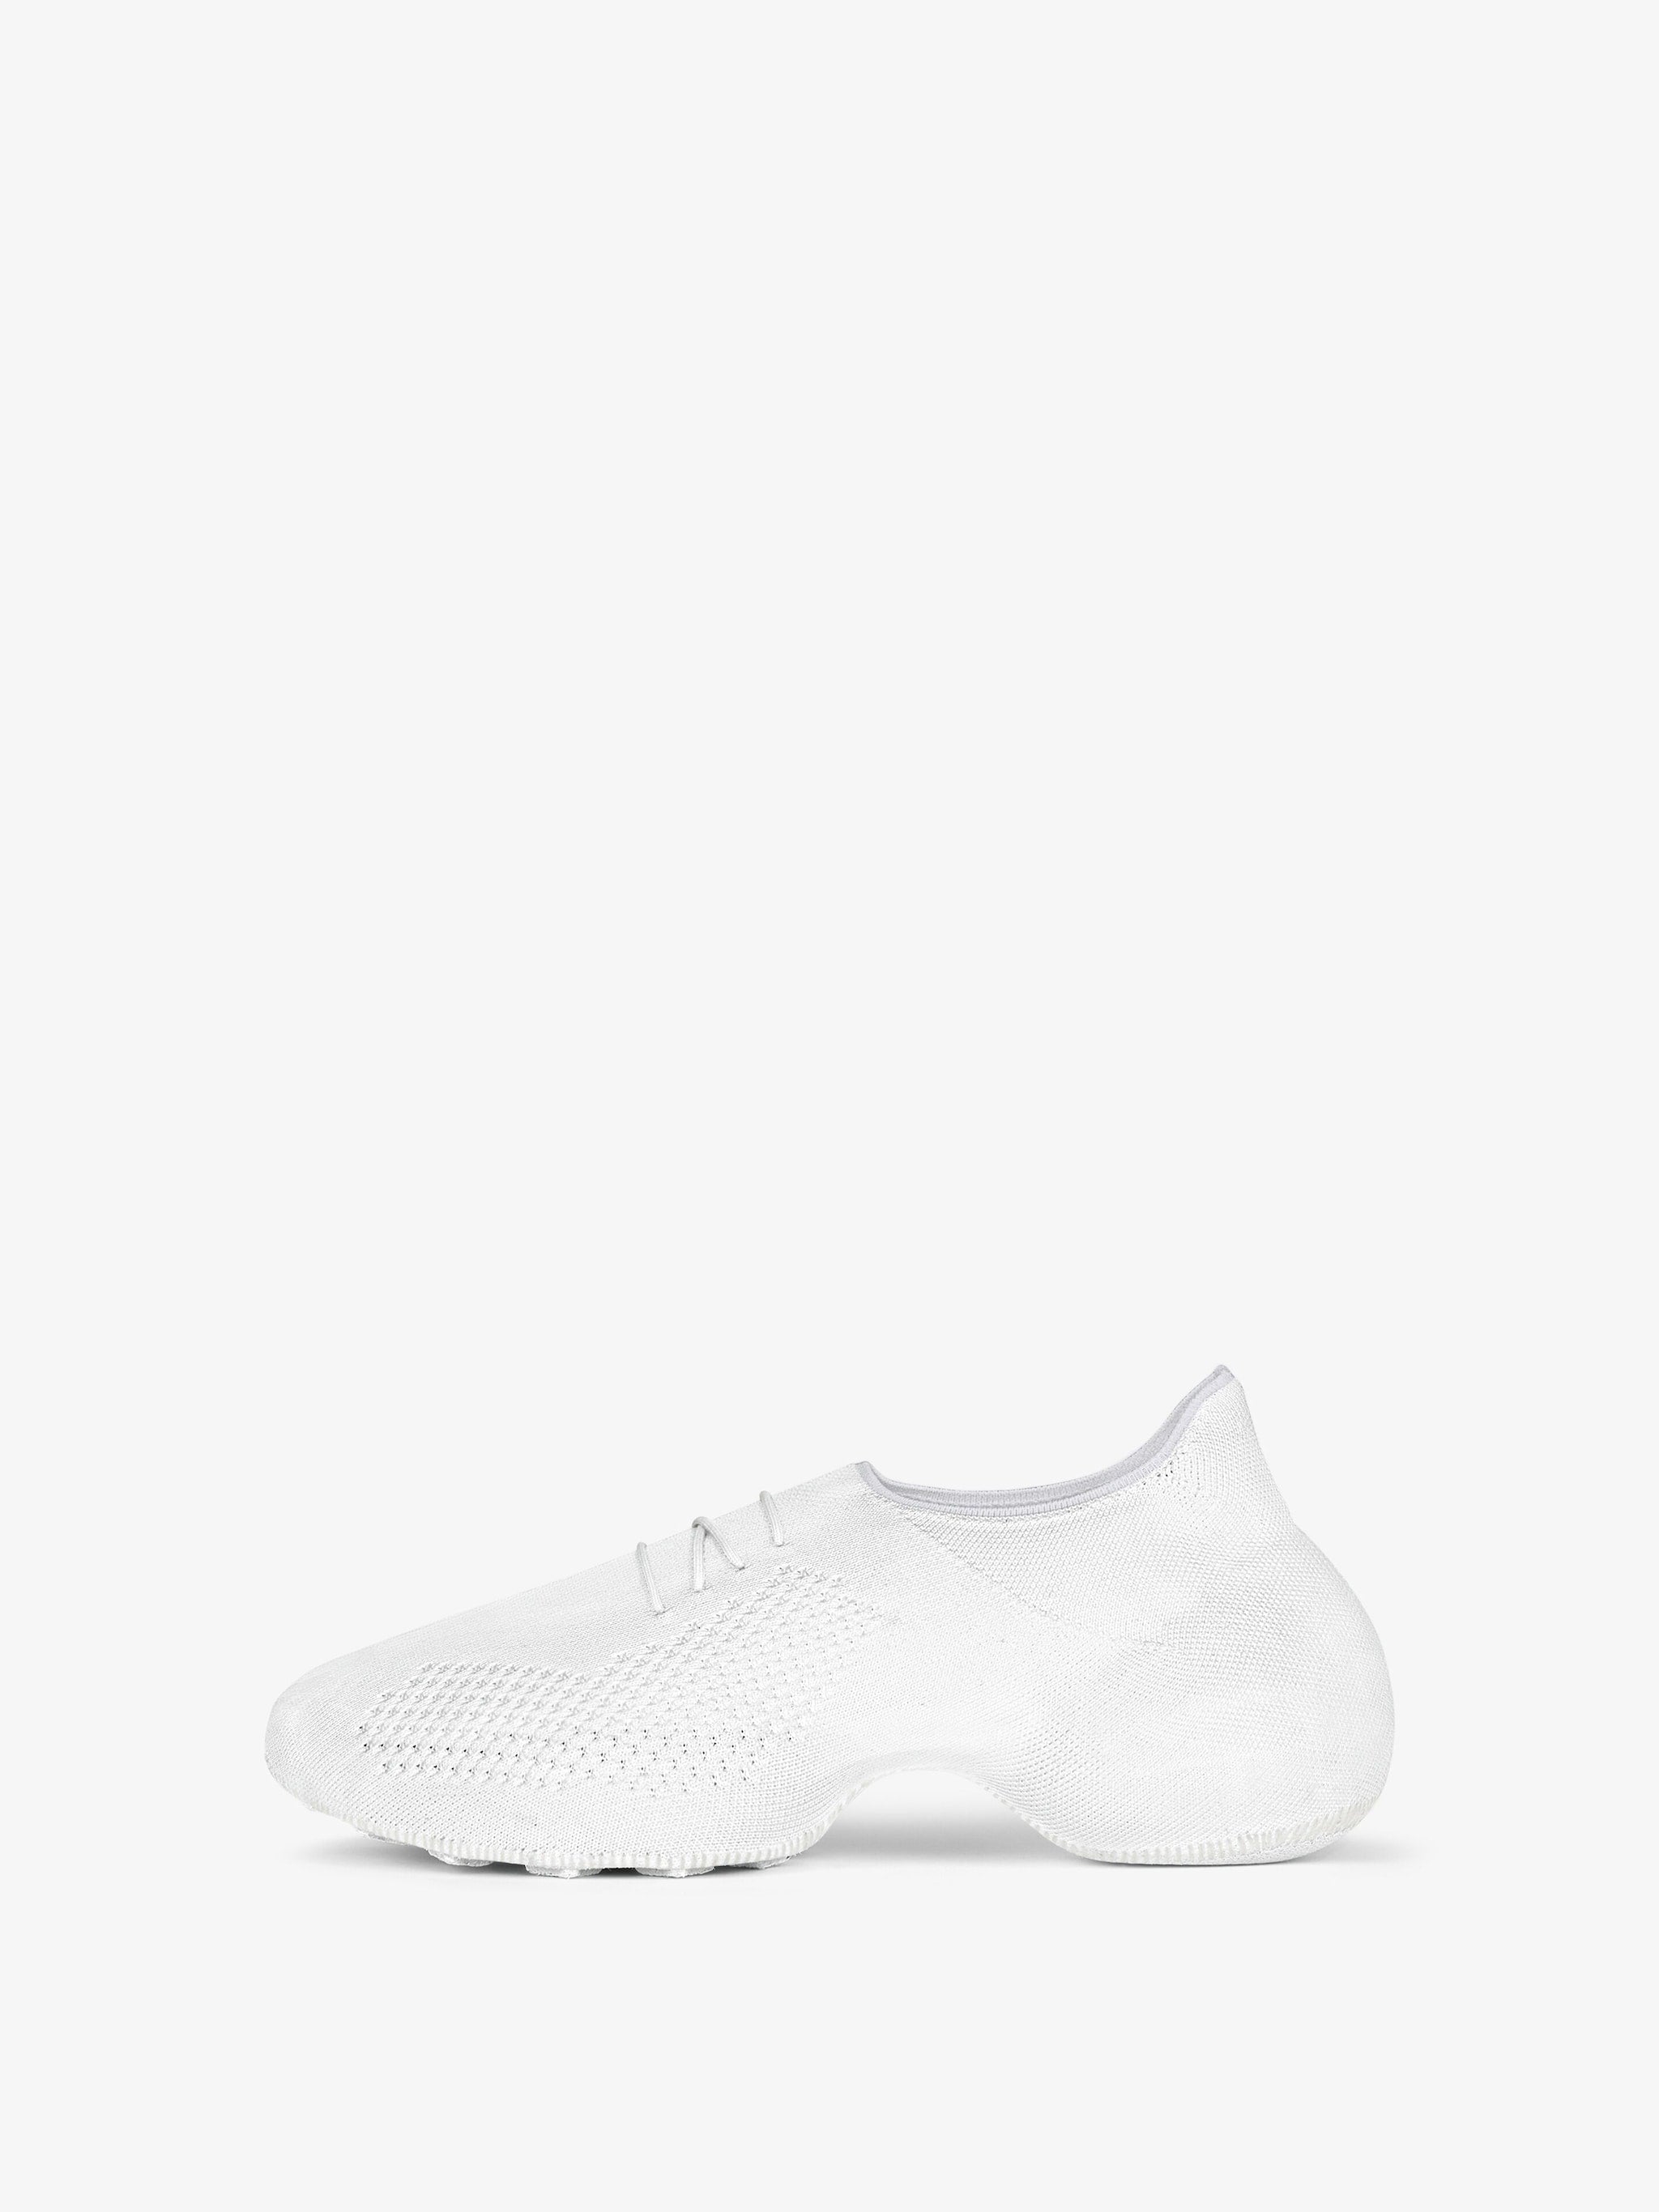 Givenchy TK-360 Sneakers In Knit White